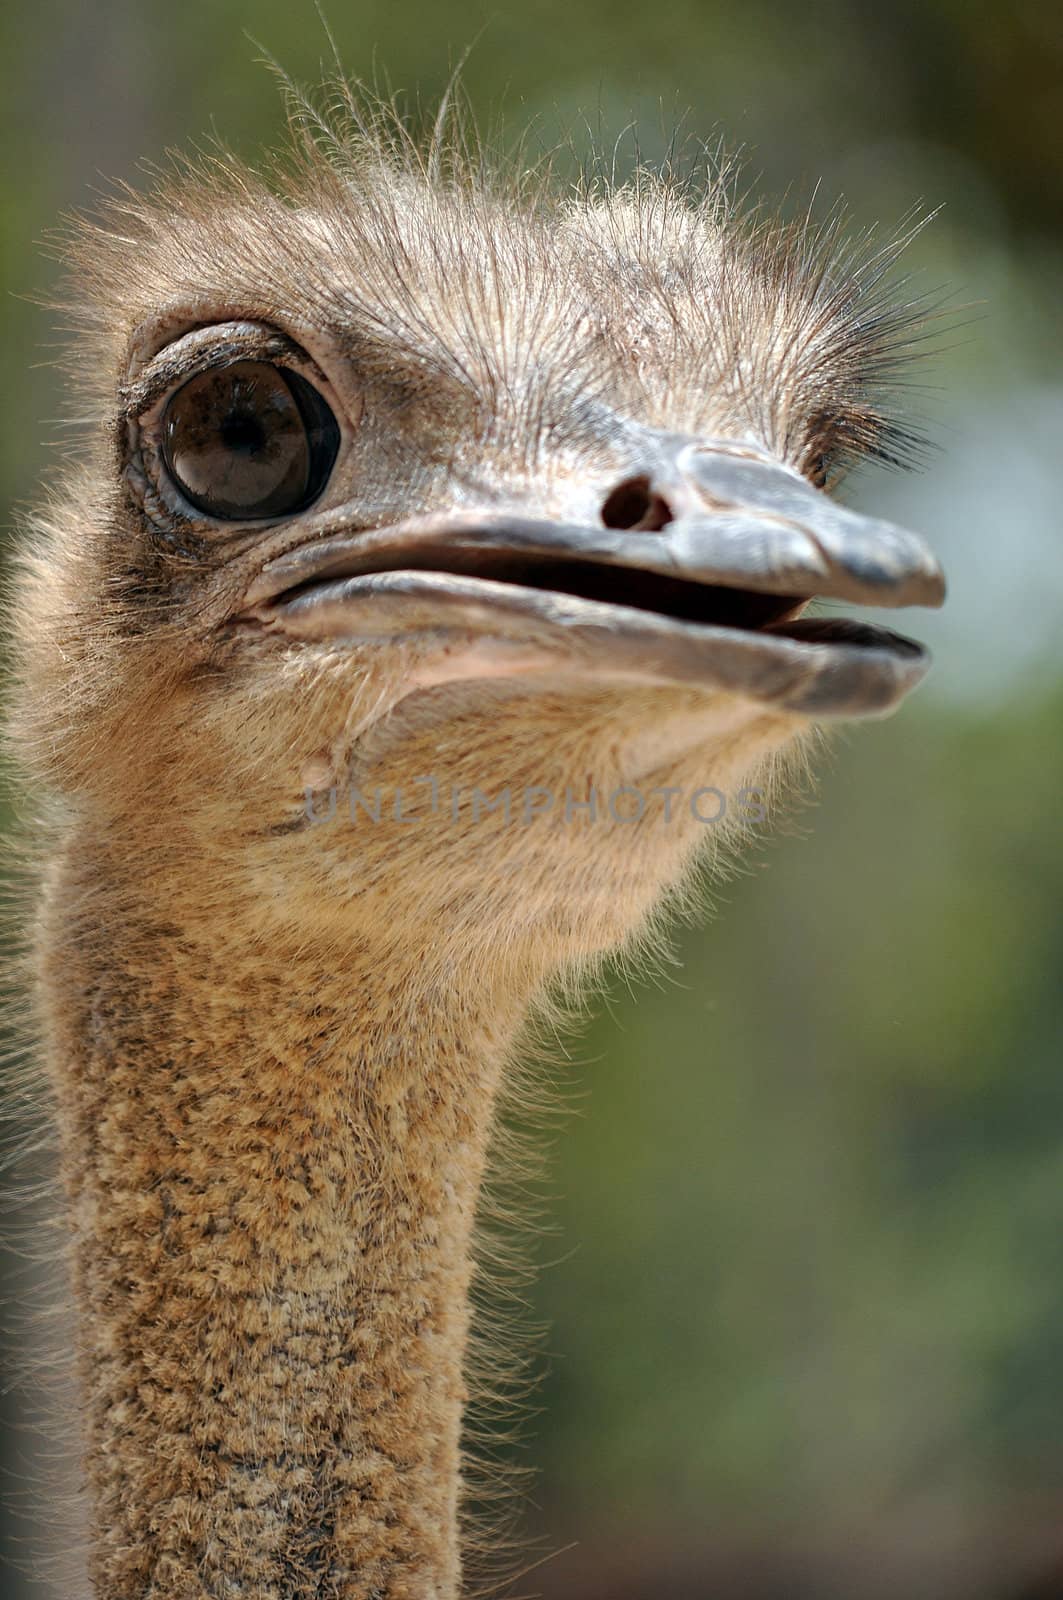 The head and neck of both male and female Ostriches is nearly bare, with a thin layer of down.